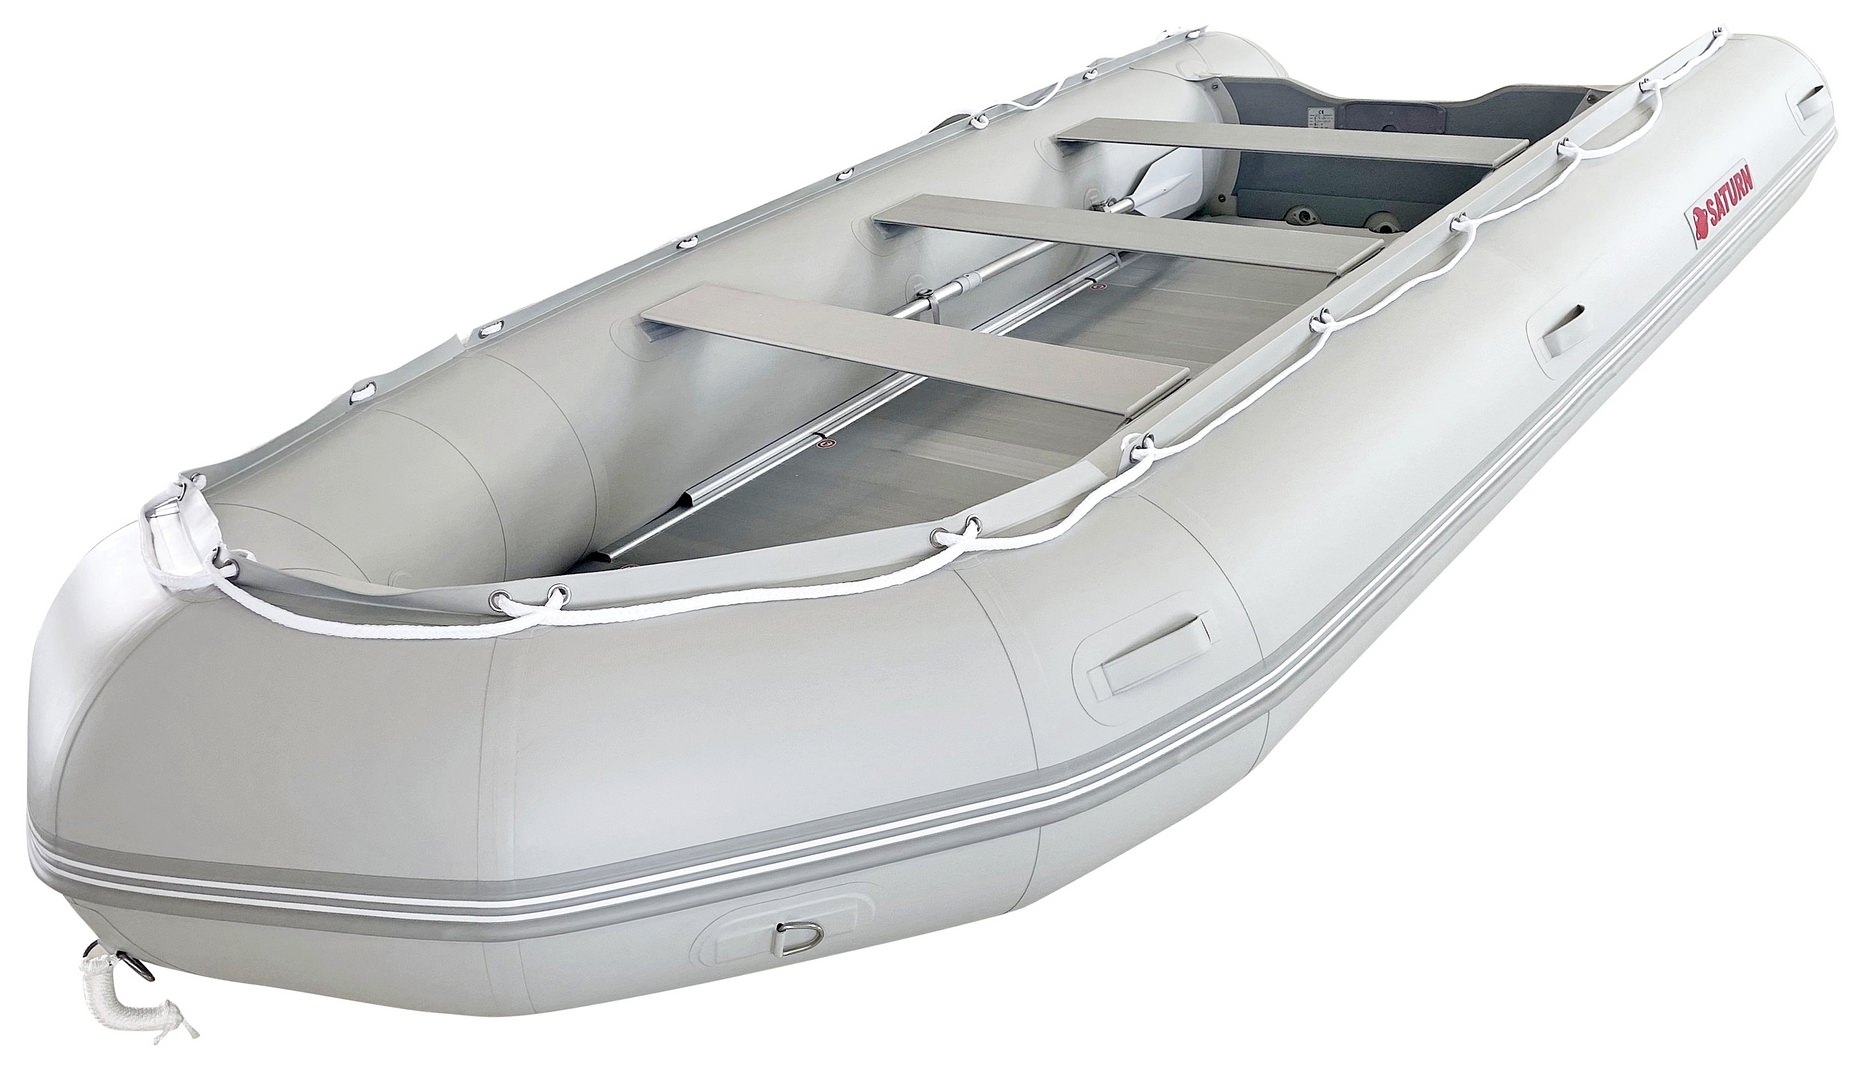 Maken Raap Trots 15' Military Grade Inflatable Boats for Special Ops, Fire Rescue